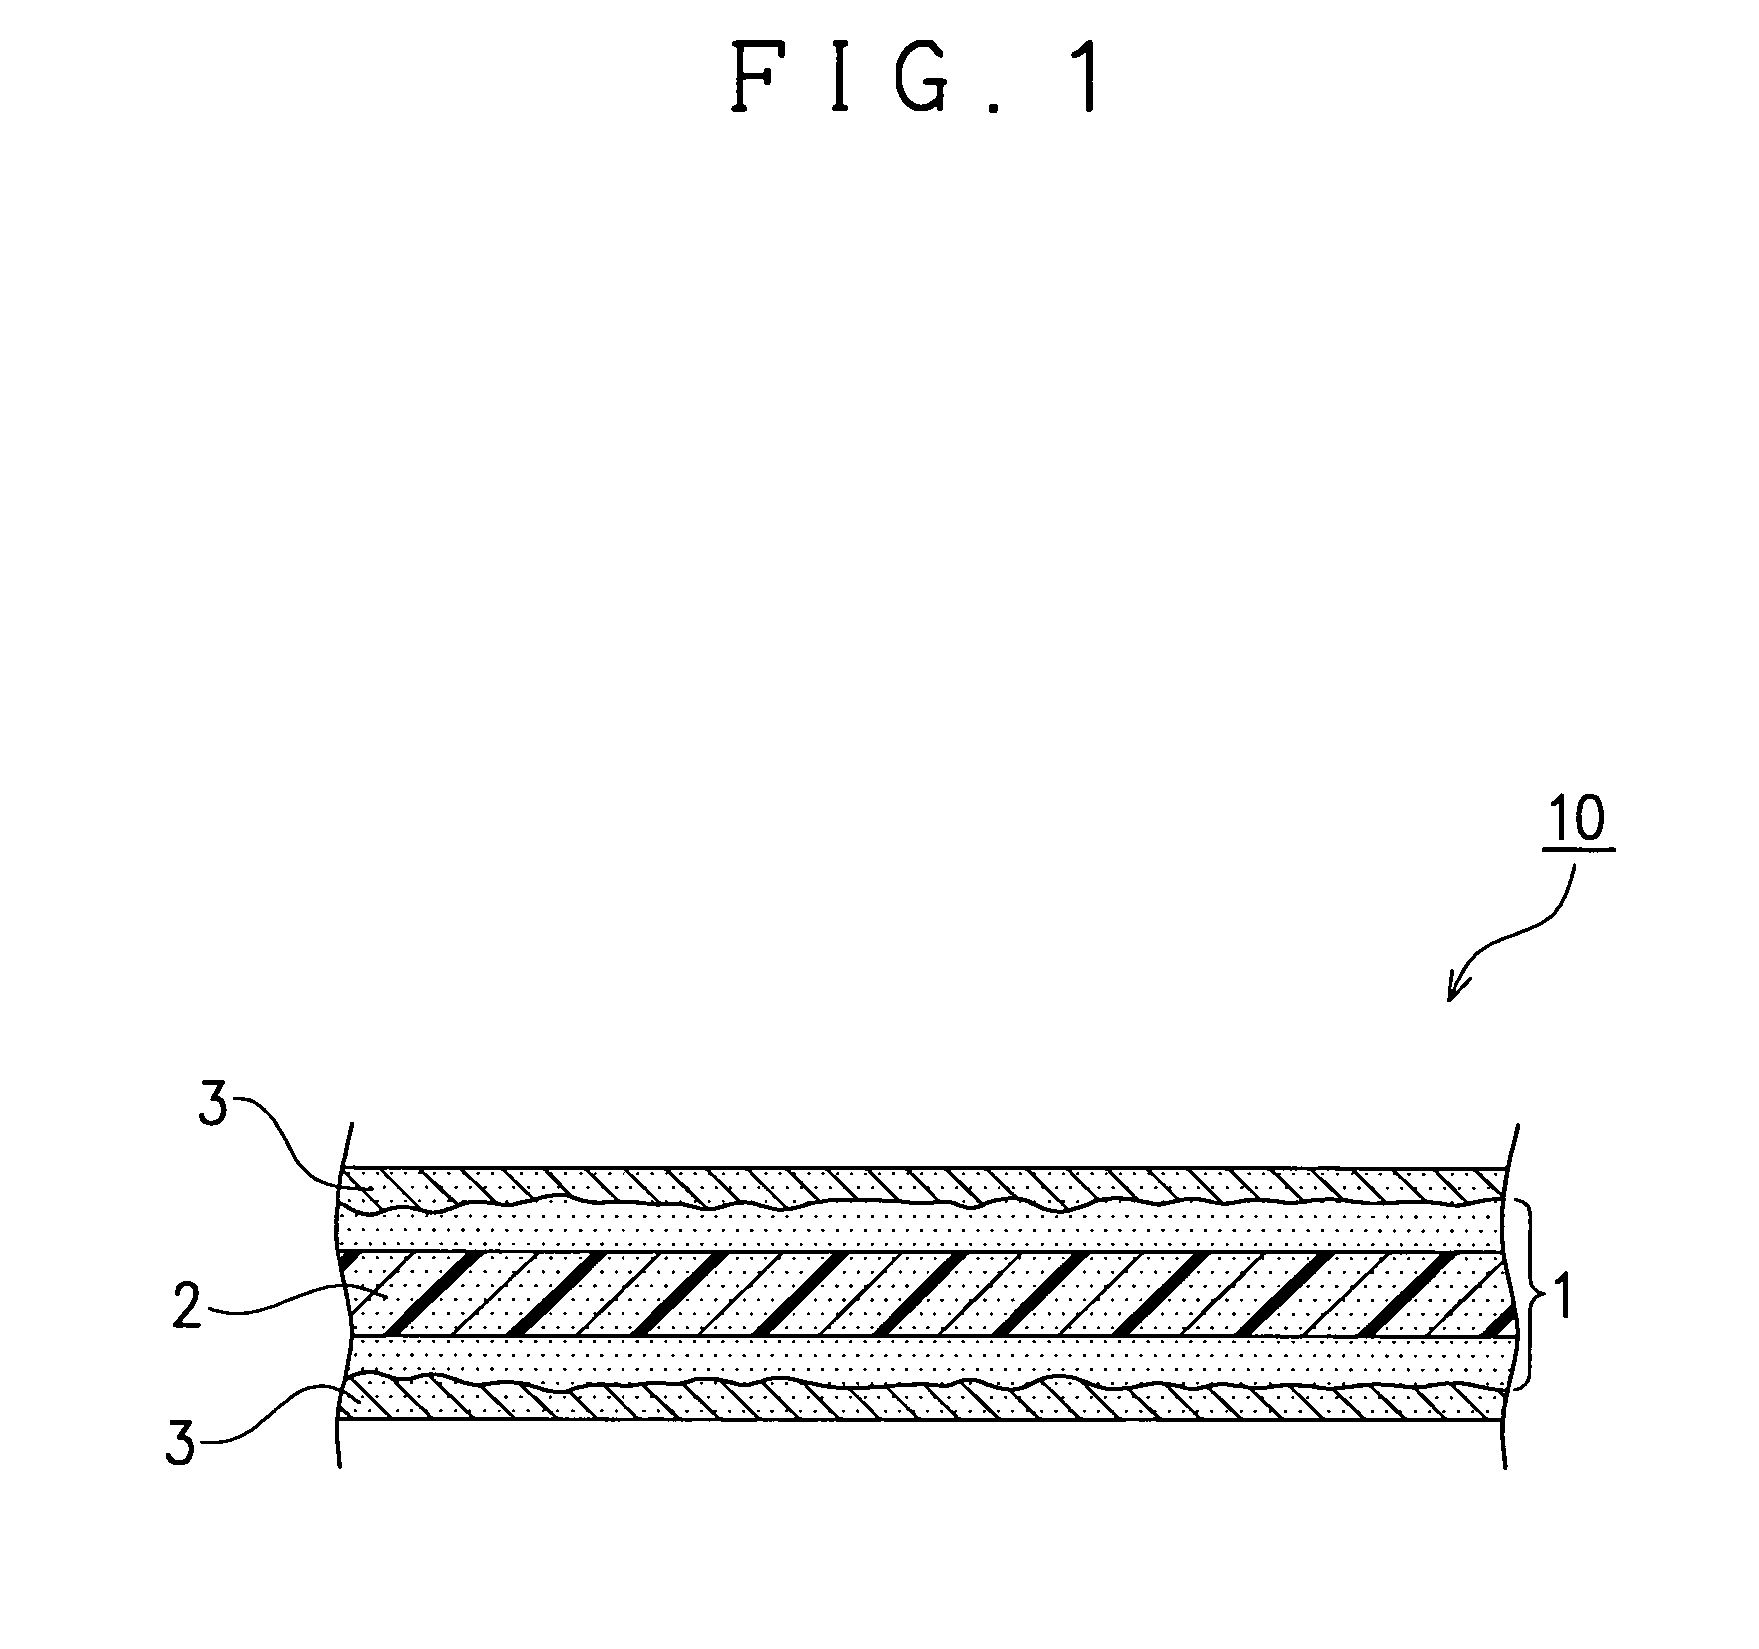 Resin sheet, liquid crystal cell substrate, liquid crystal display device, substrate for an electroluminescence display device, electroluminescence display device, and a substrate for a solar cell